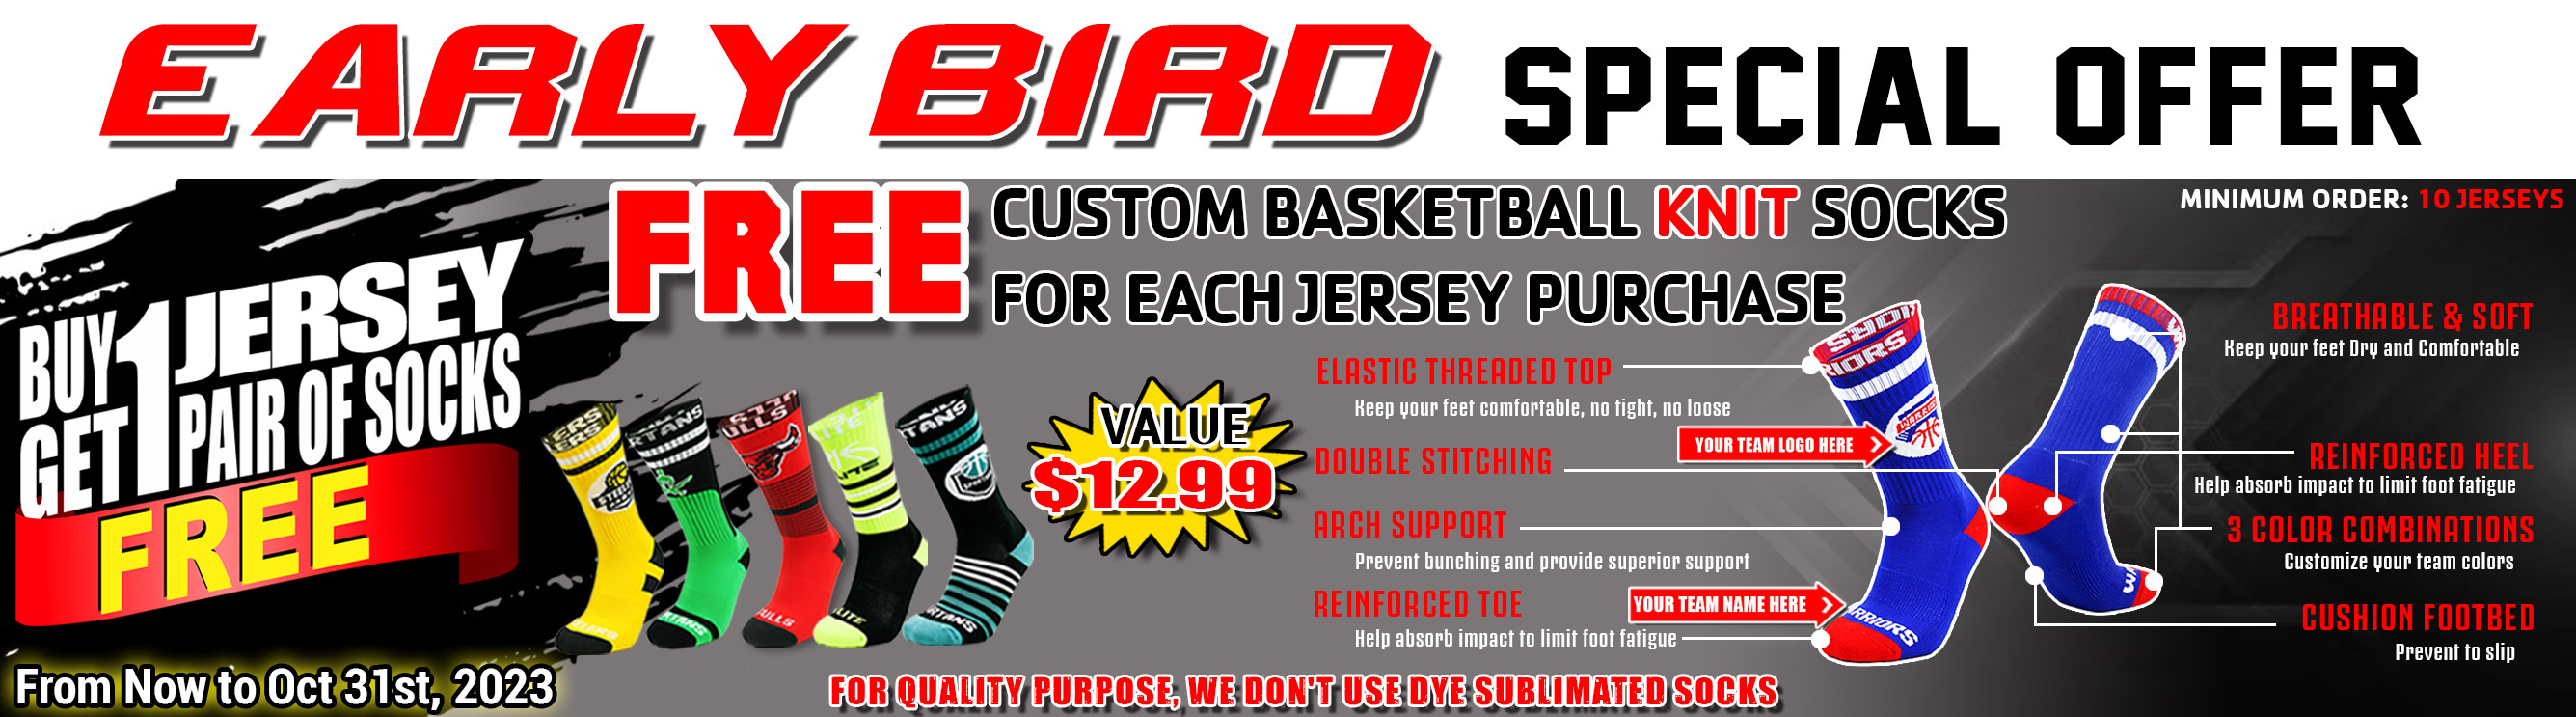 FREE CUSTOMIZE OF NAME AND NUMBER ONLY BALLERS 08 BASKETBALL JERSEY full  sublimation high quality fabrics/ trending jersey